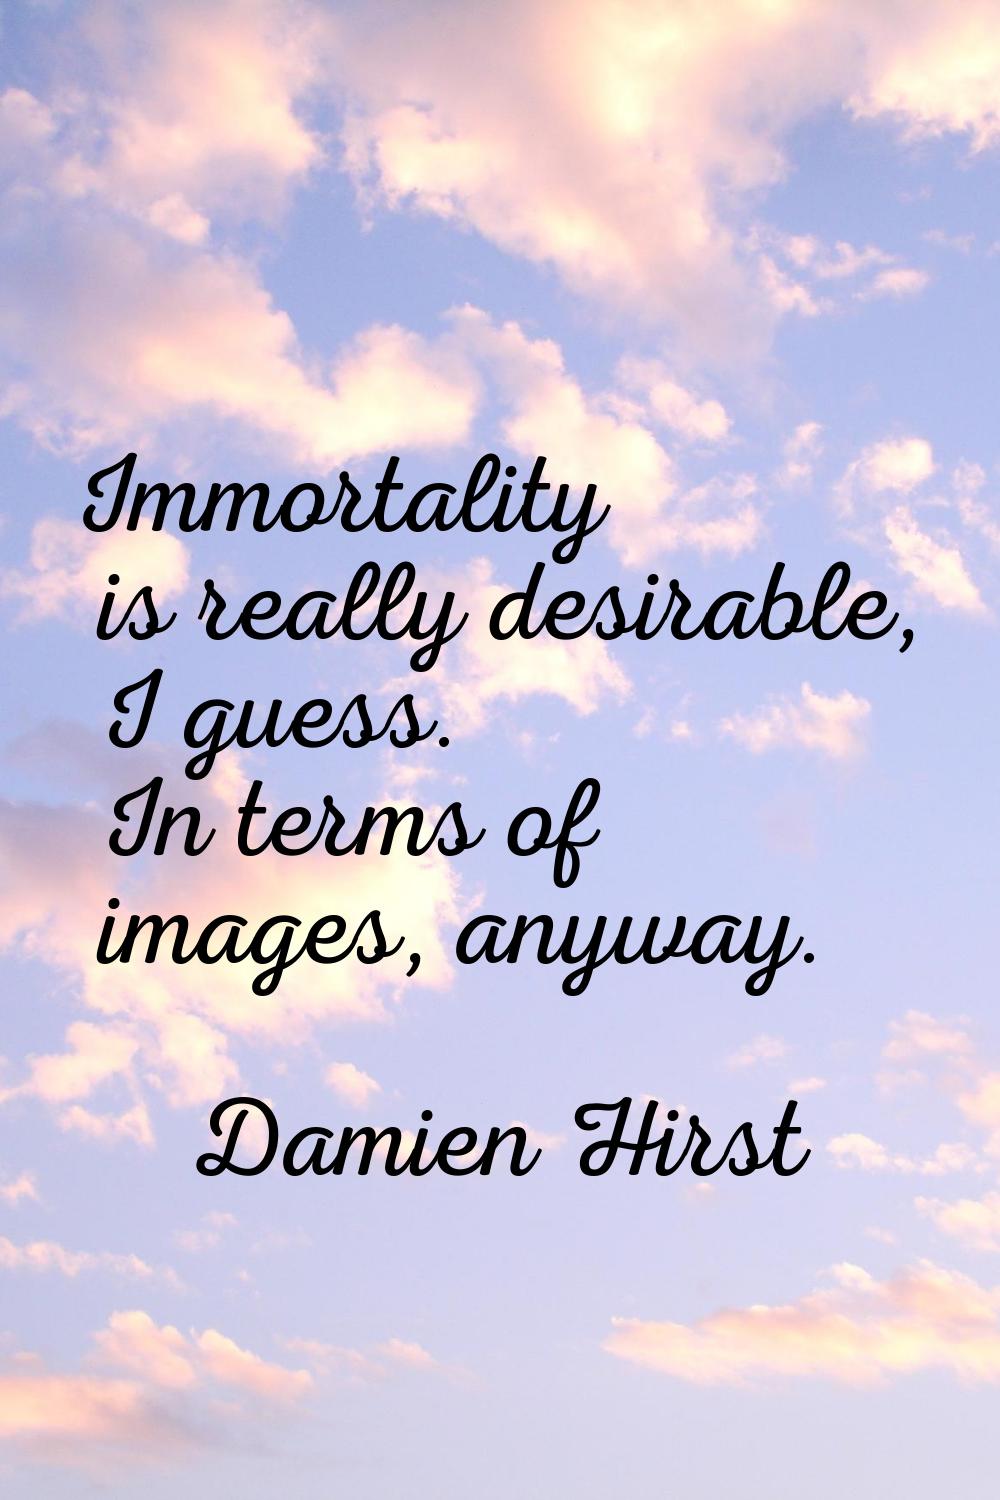 Immortality is really desirable, I guess. In terms of images, anyway.